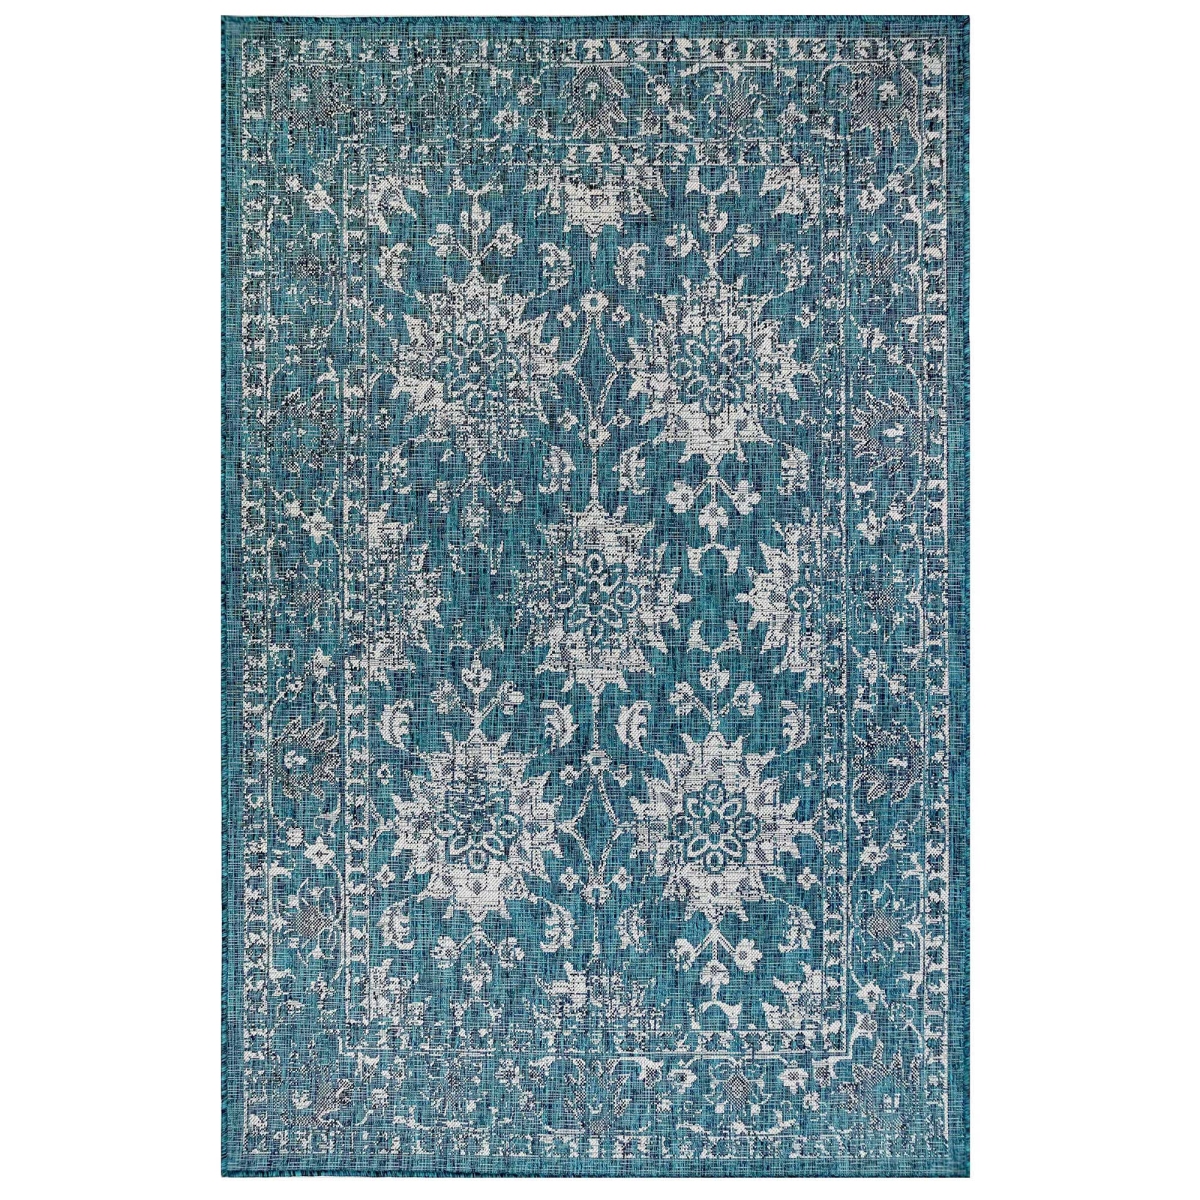 Trans-ocean Imports Cre45841894 39 In. X 59 In. Liora Manne Carmel Vintage Floral Indoor & Outdoor Wilton Woven Rectangle Rug - Teal